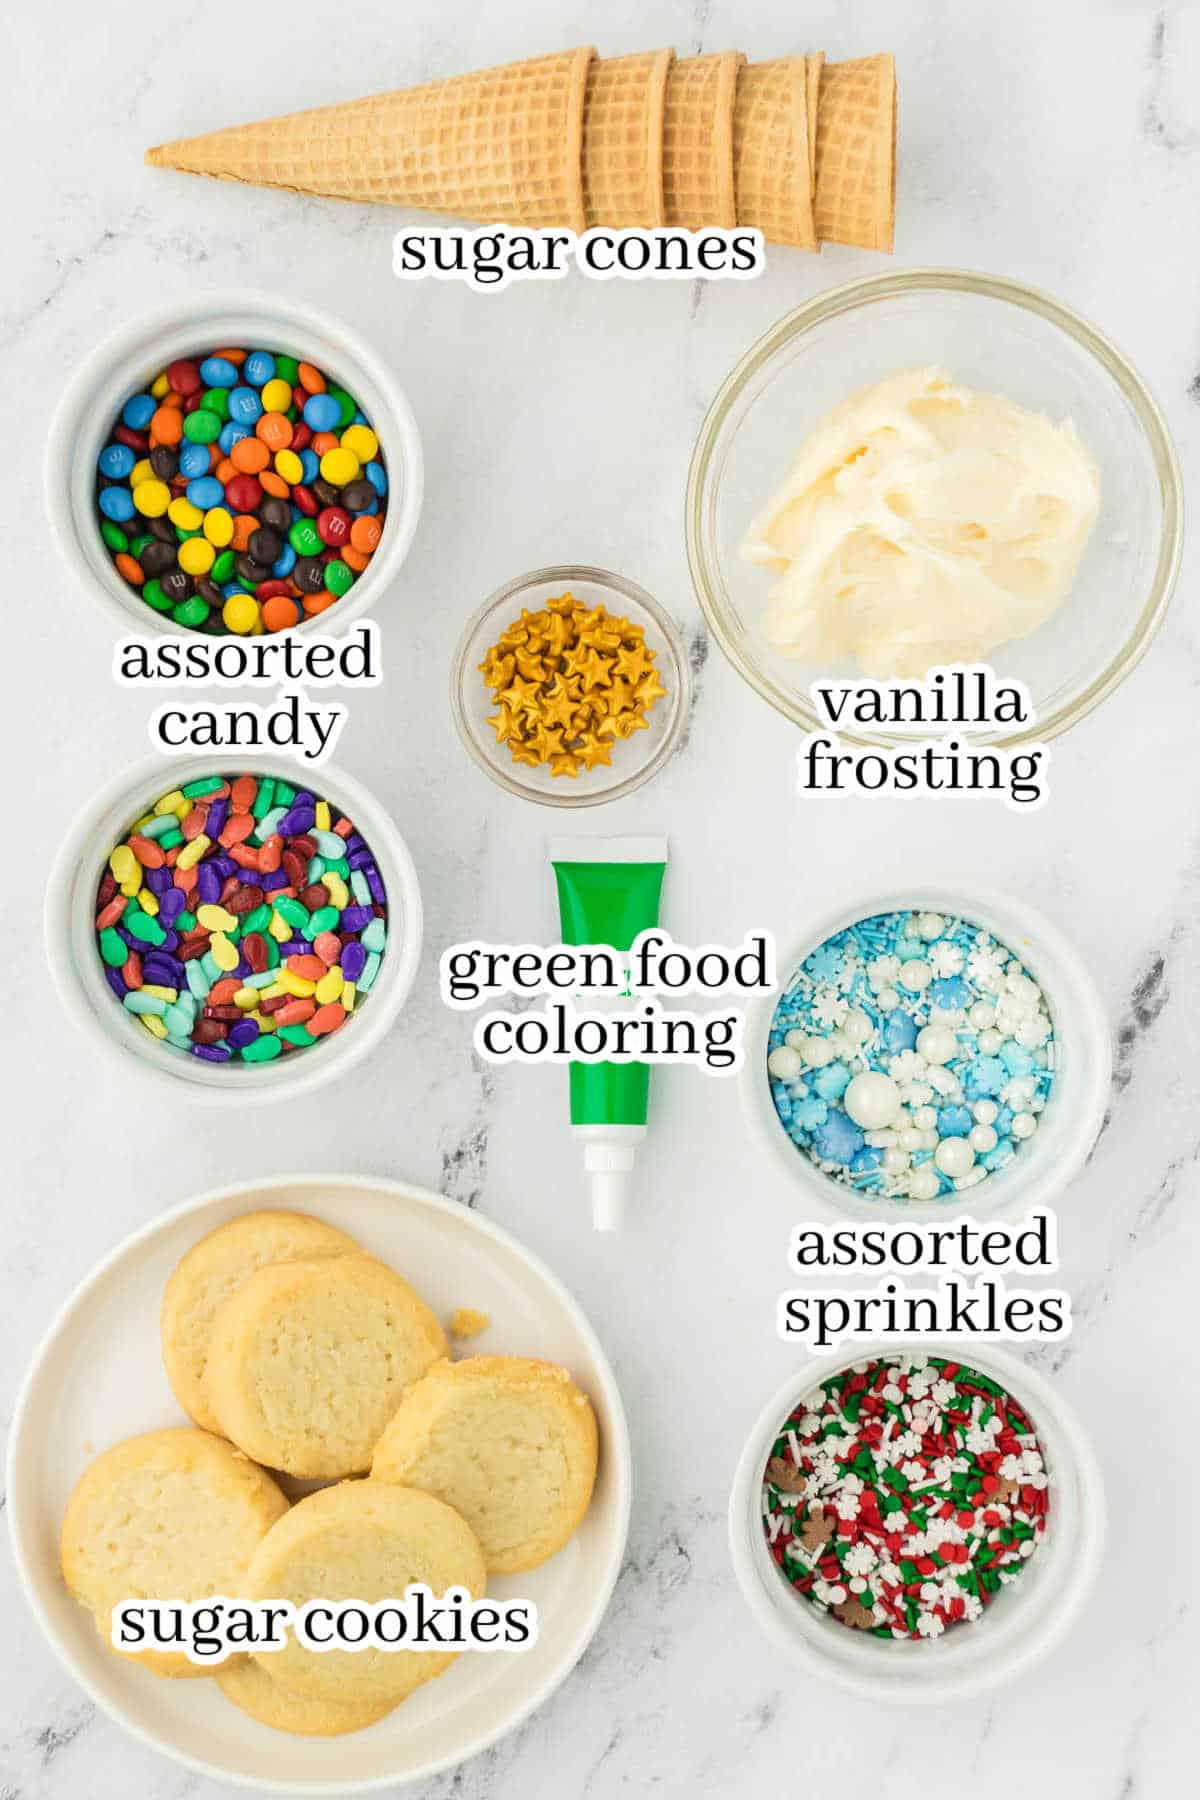 Ingredients to make the candy recipe, with print overlay for clarification.